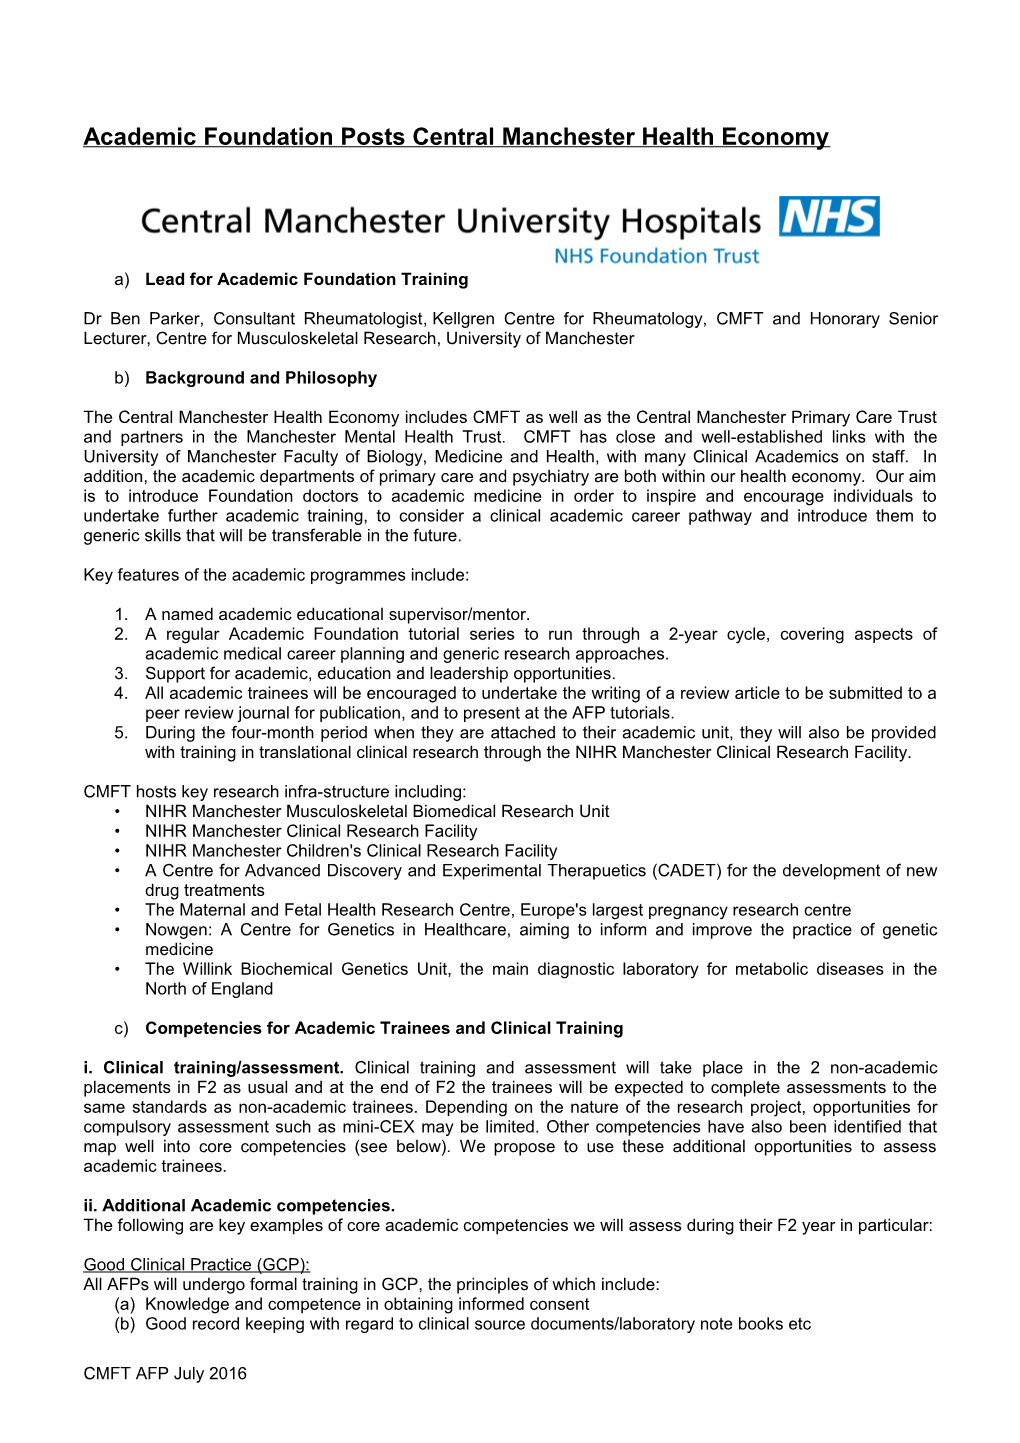 Re: Academic Foundation Posts Central Manchester Health Economy